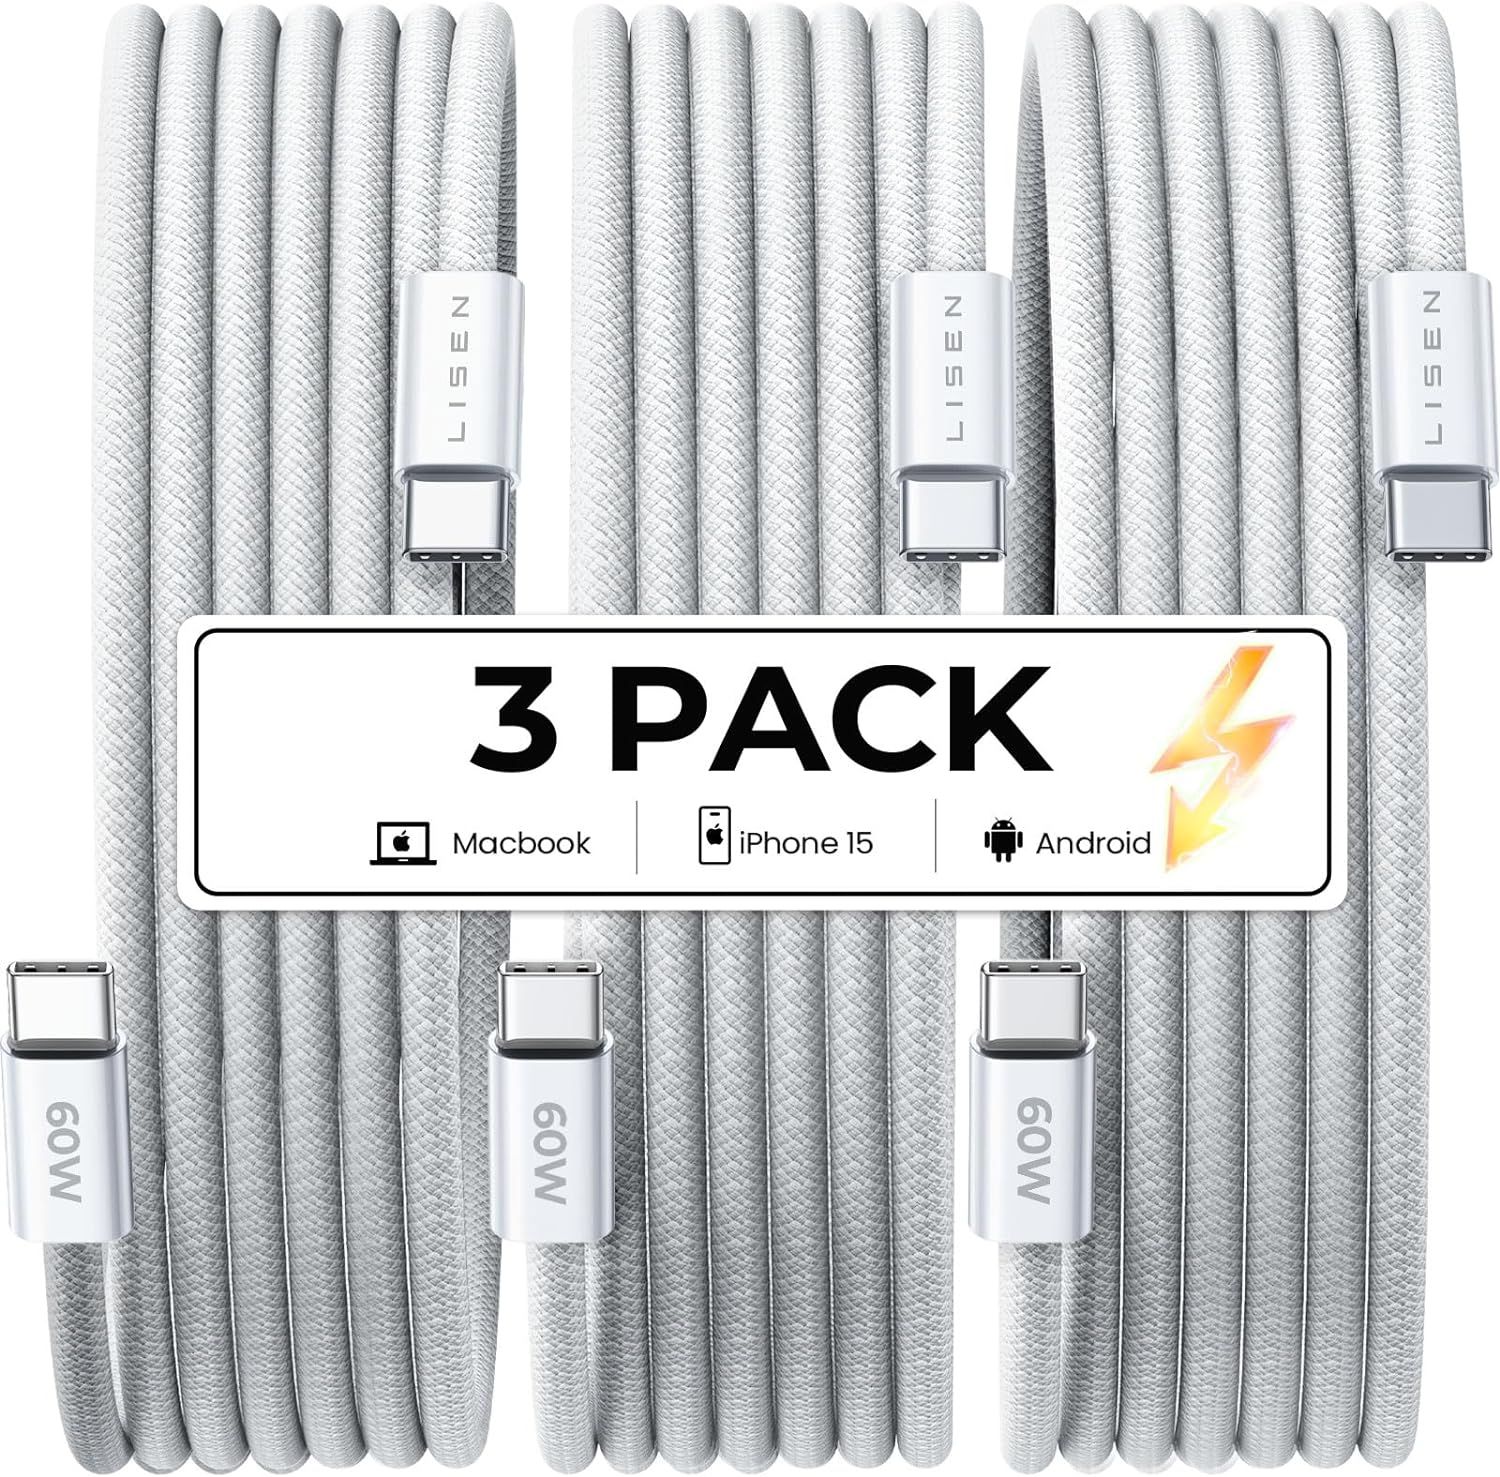 Fast-charge multiple devices for dirt cheap with this 3-pack of USB-C cables  for only $7